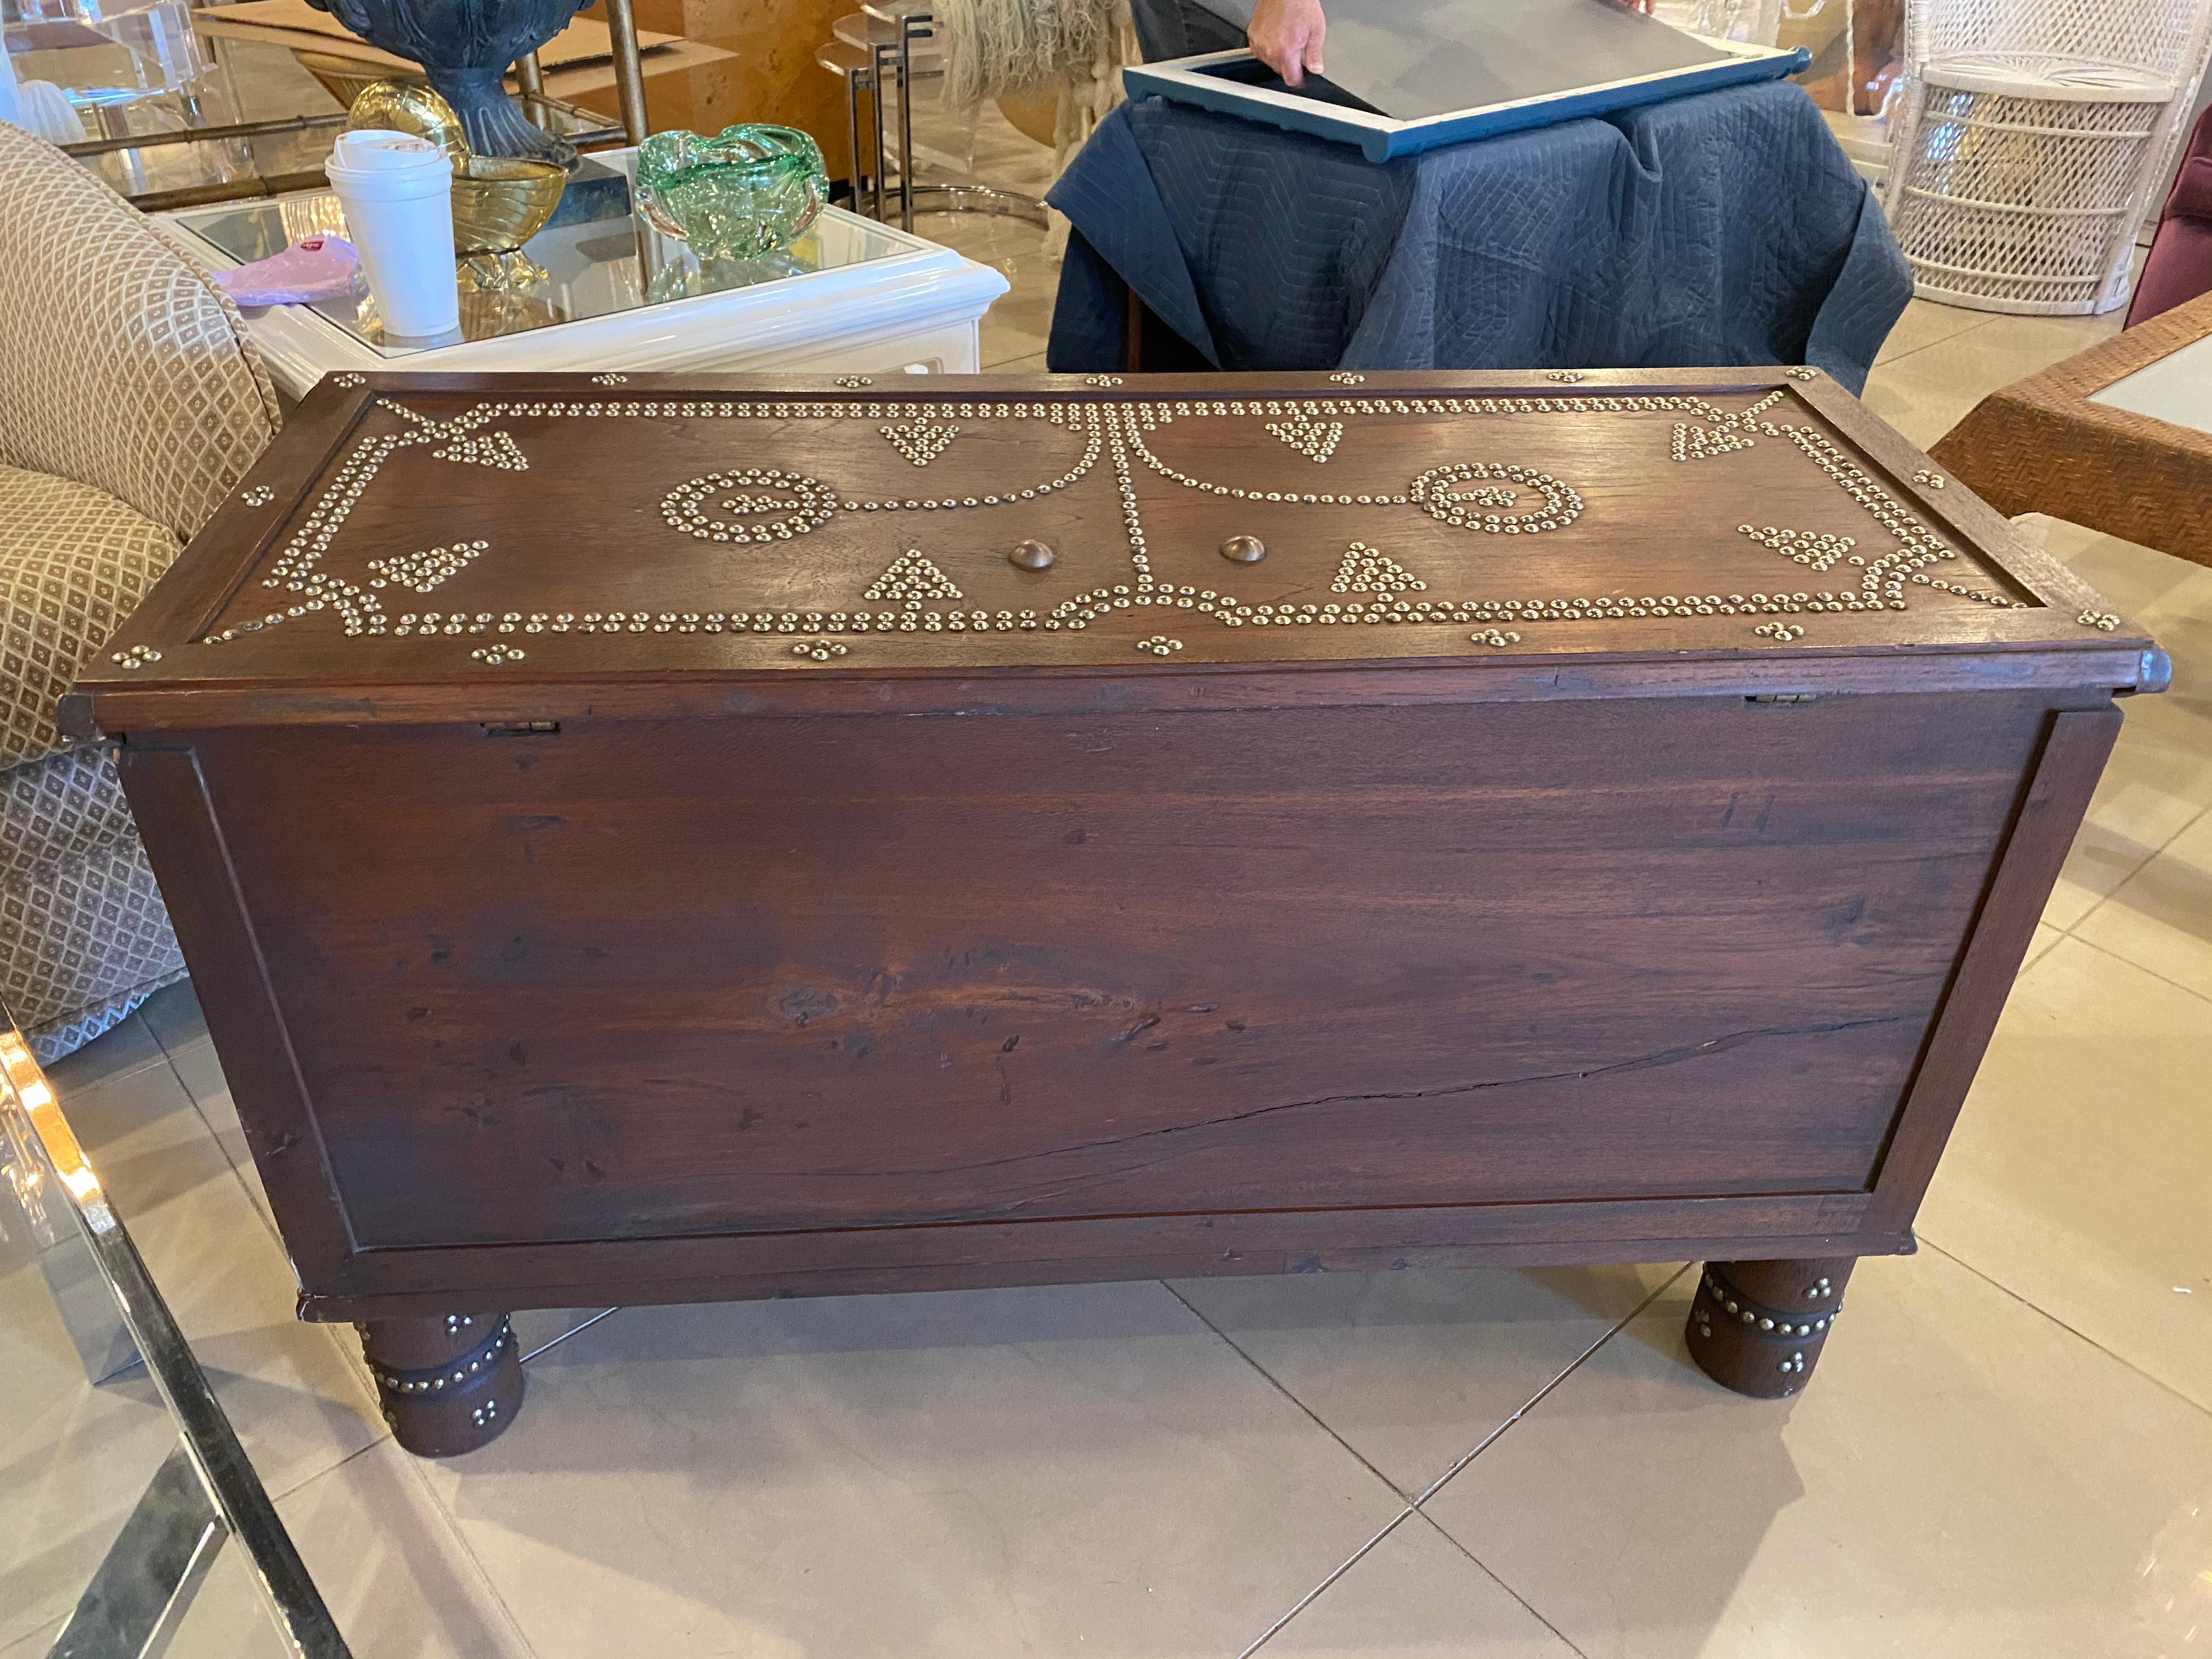 Lovely rare Zanzibar trunk, 19th century. Brass studded decorations all-over with brass clad panels. Three bottom drawers and top opens for storage as well. These were used in Kenya and Zanzibar to store valuables and spices in the 18th and 19th